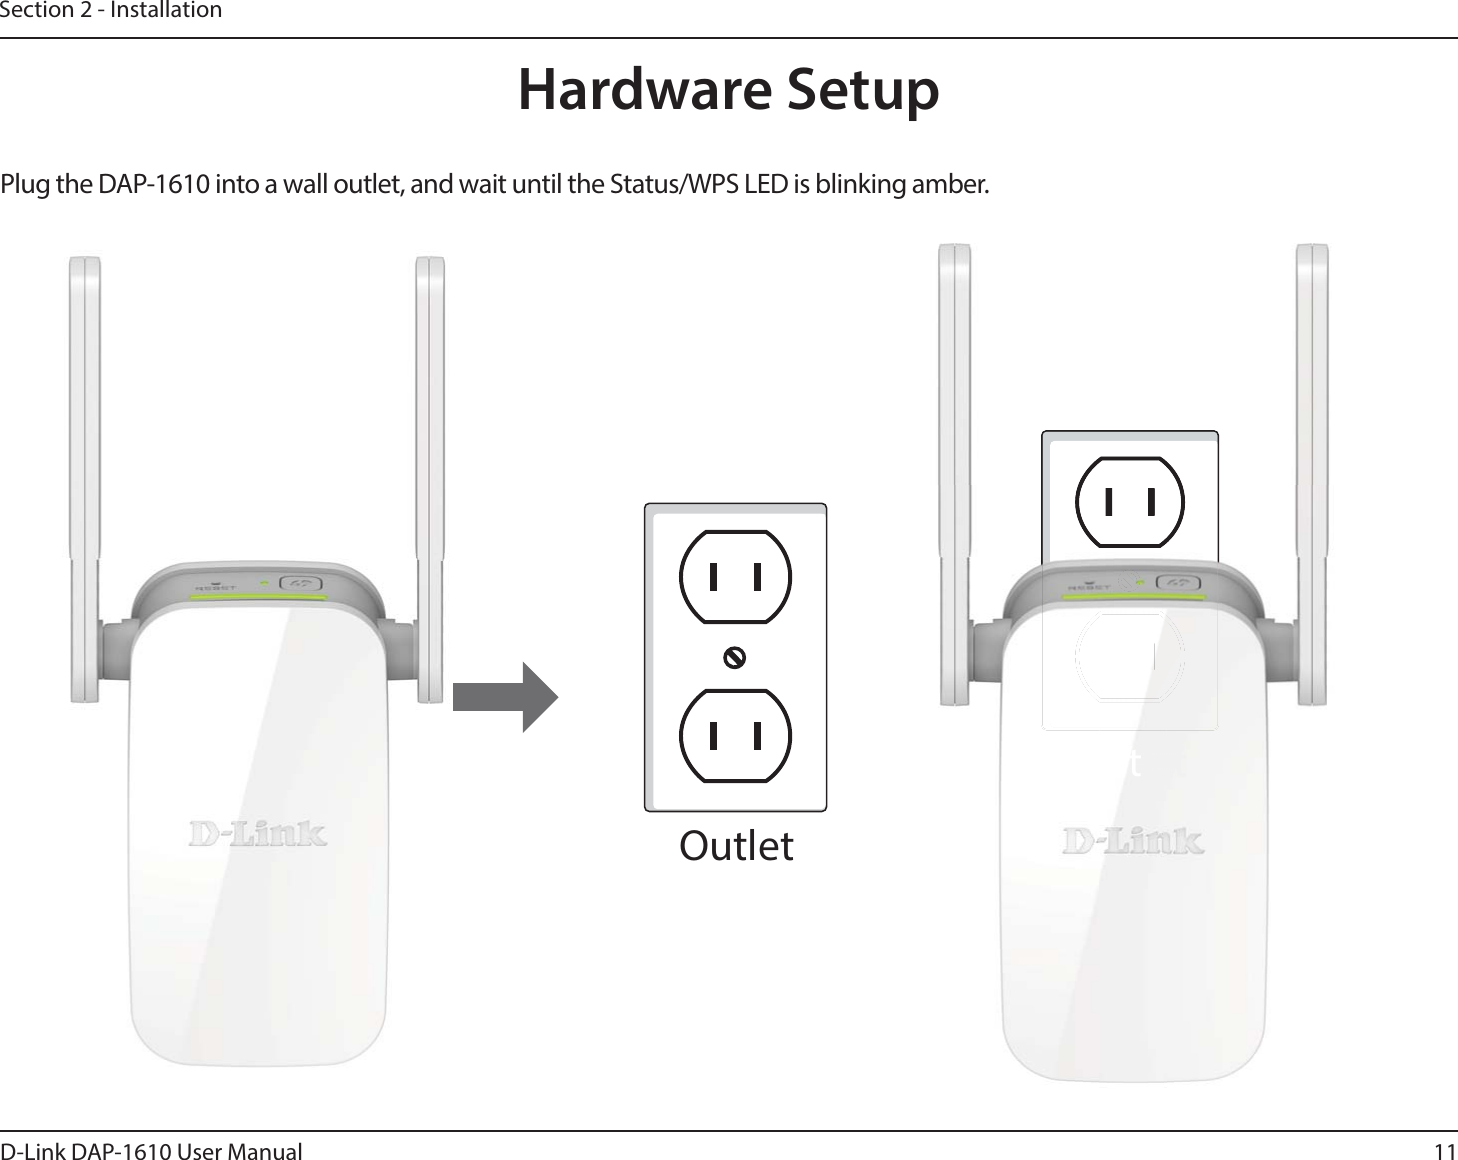 11D-Link DAP-1610 User ManualSection 2 - InstallationPlug the DAP-1610 into a wall outlet, and wait until the Status/WPS LED is blinking amber. OutletOutletHardware SetupOutlet